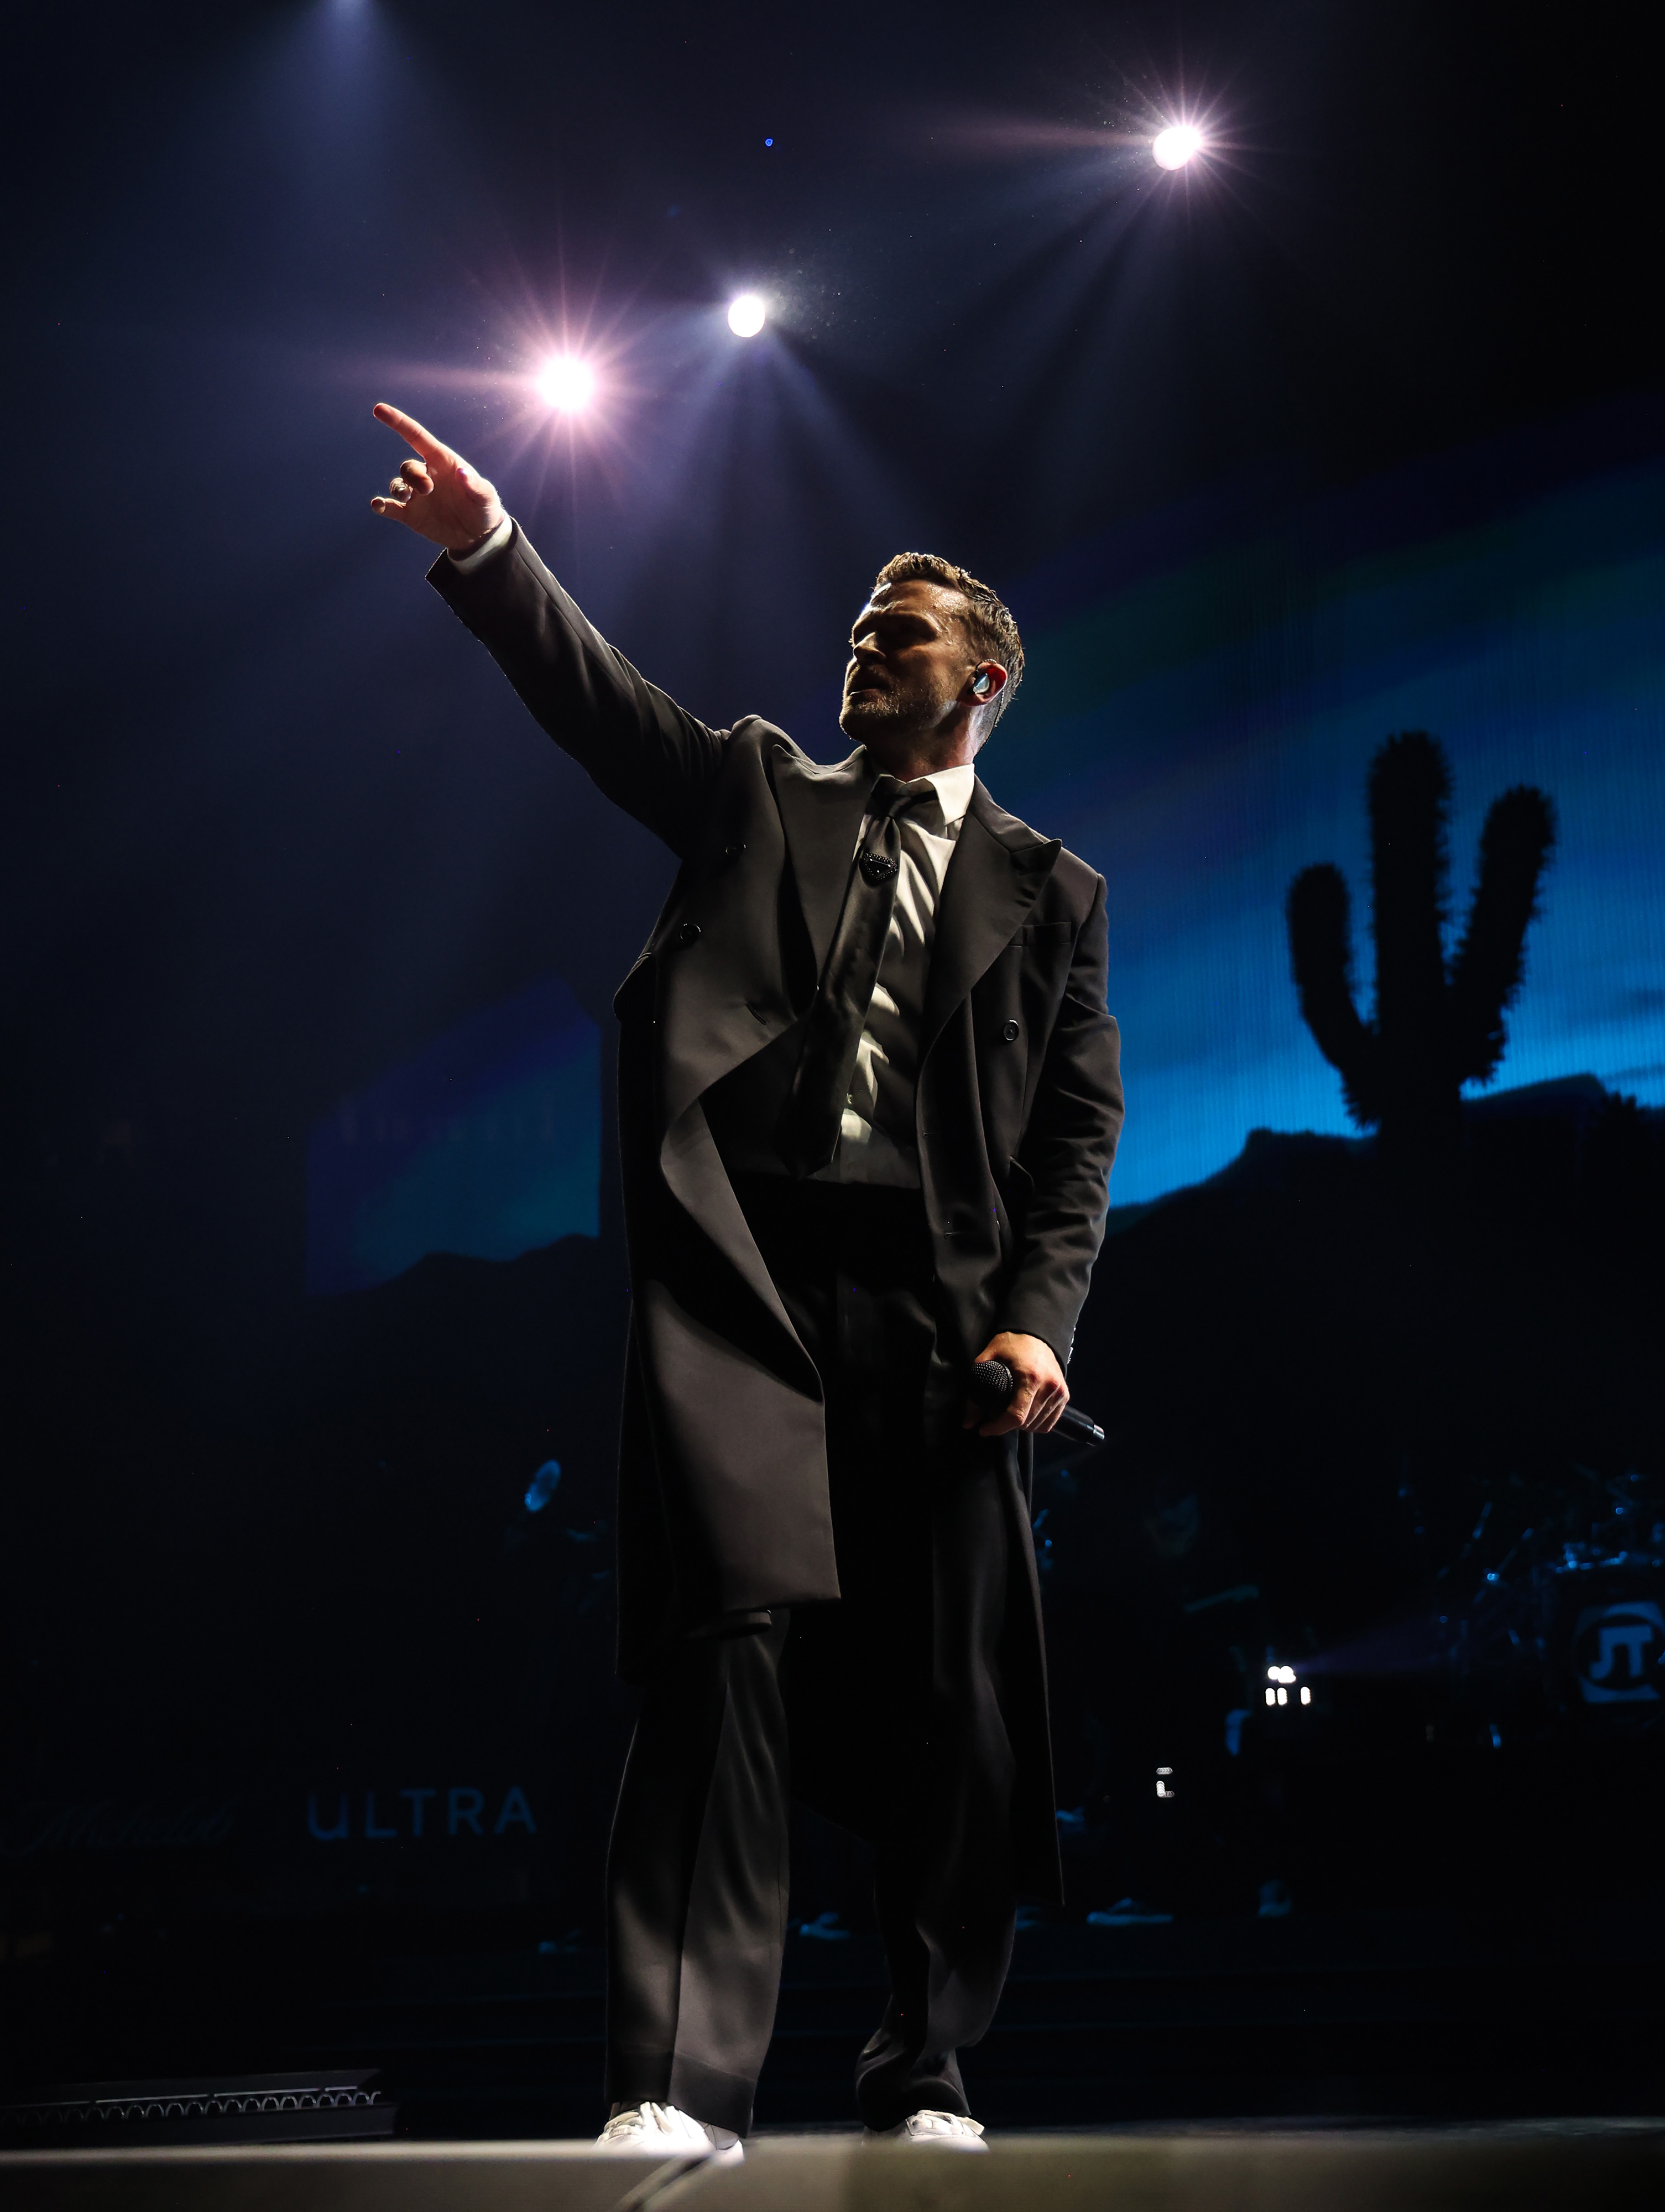 Justin Timberlake performs on stage in a suit with a long coat, pointing upward. A desert backdrop with a cactus is visible behind him